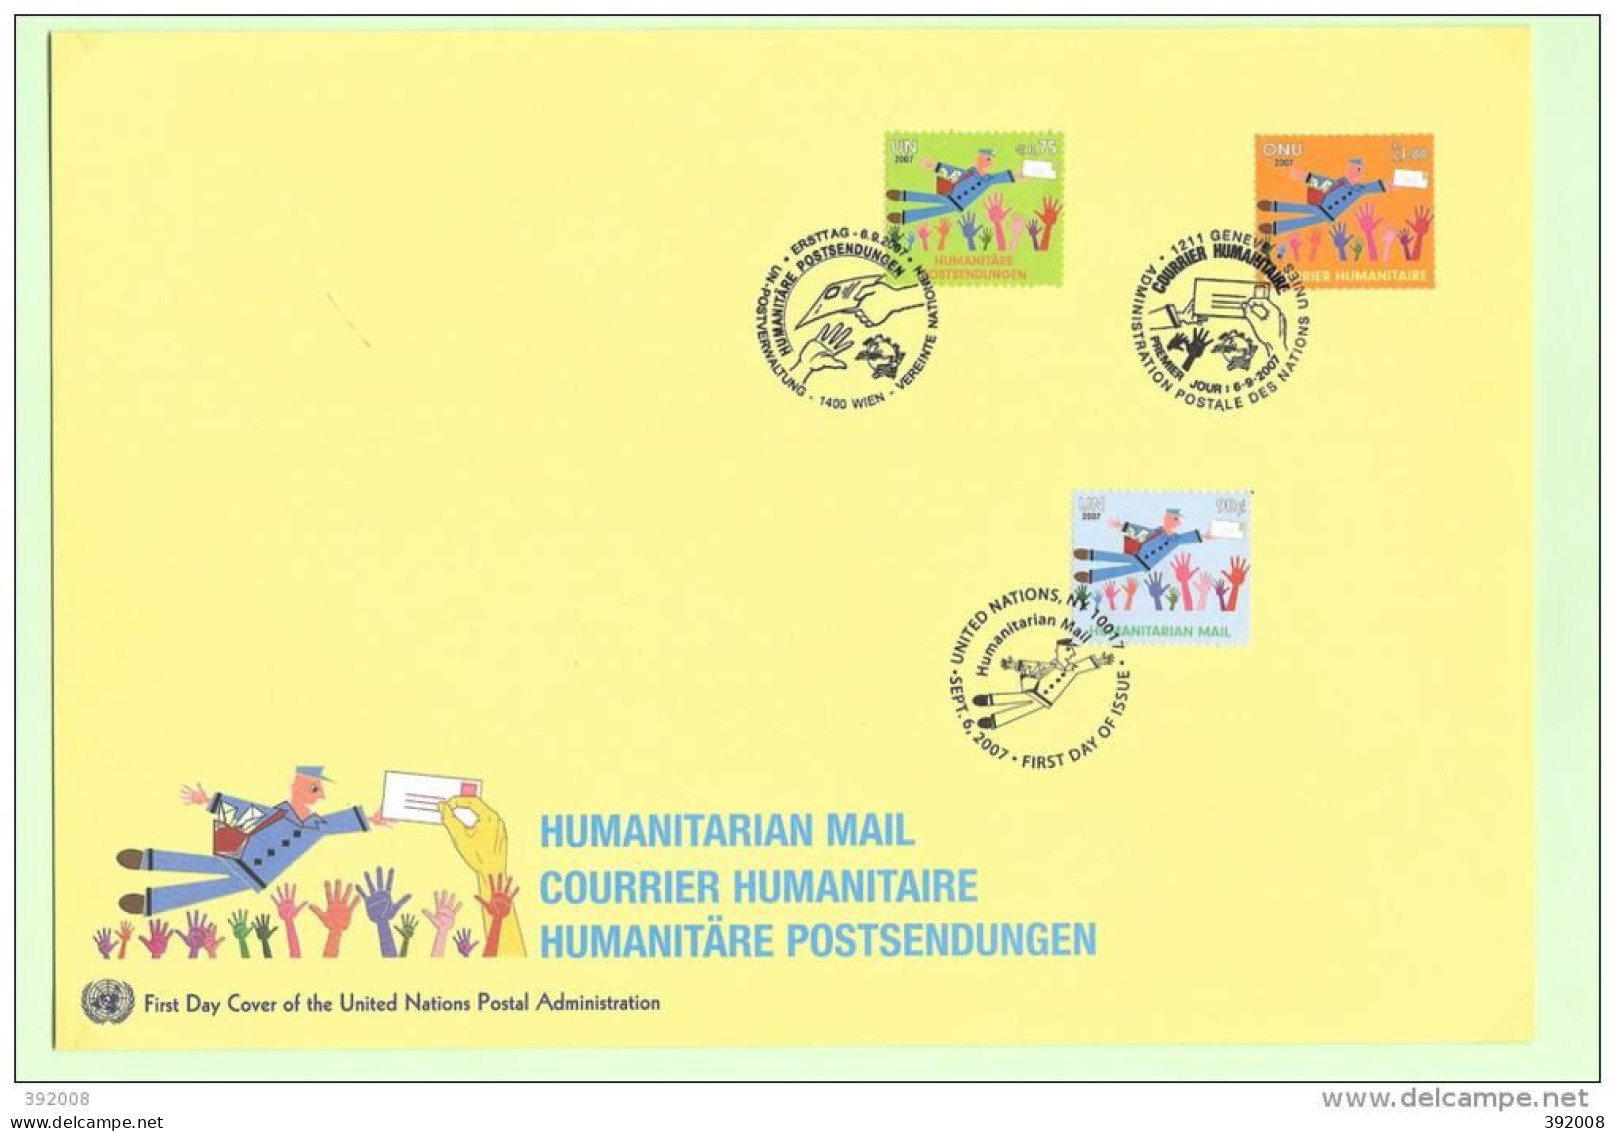 2007 - 586 - Courrier Humanitaire +New York + Vienne - 21 - FDC